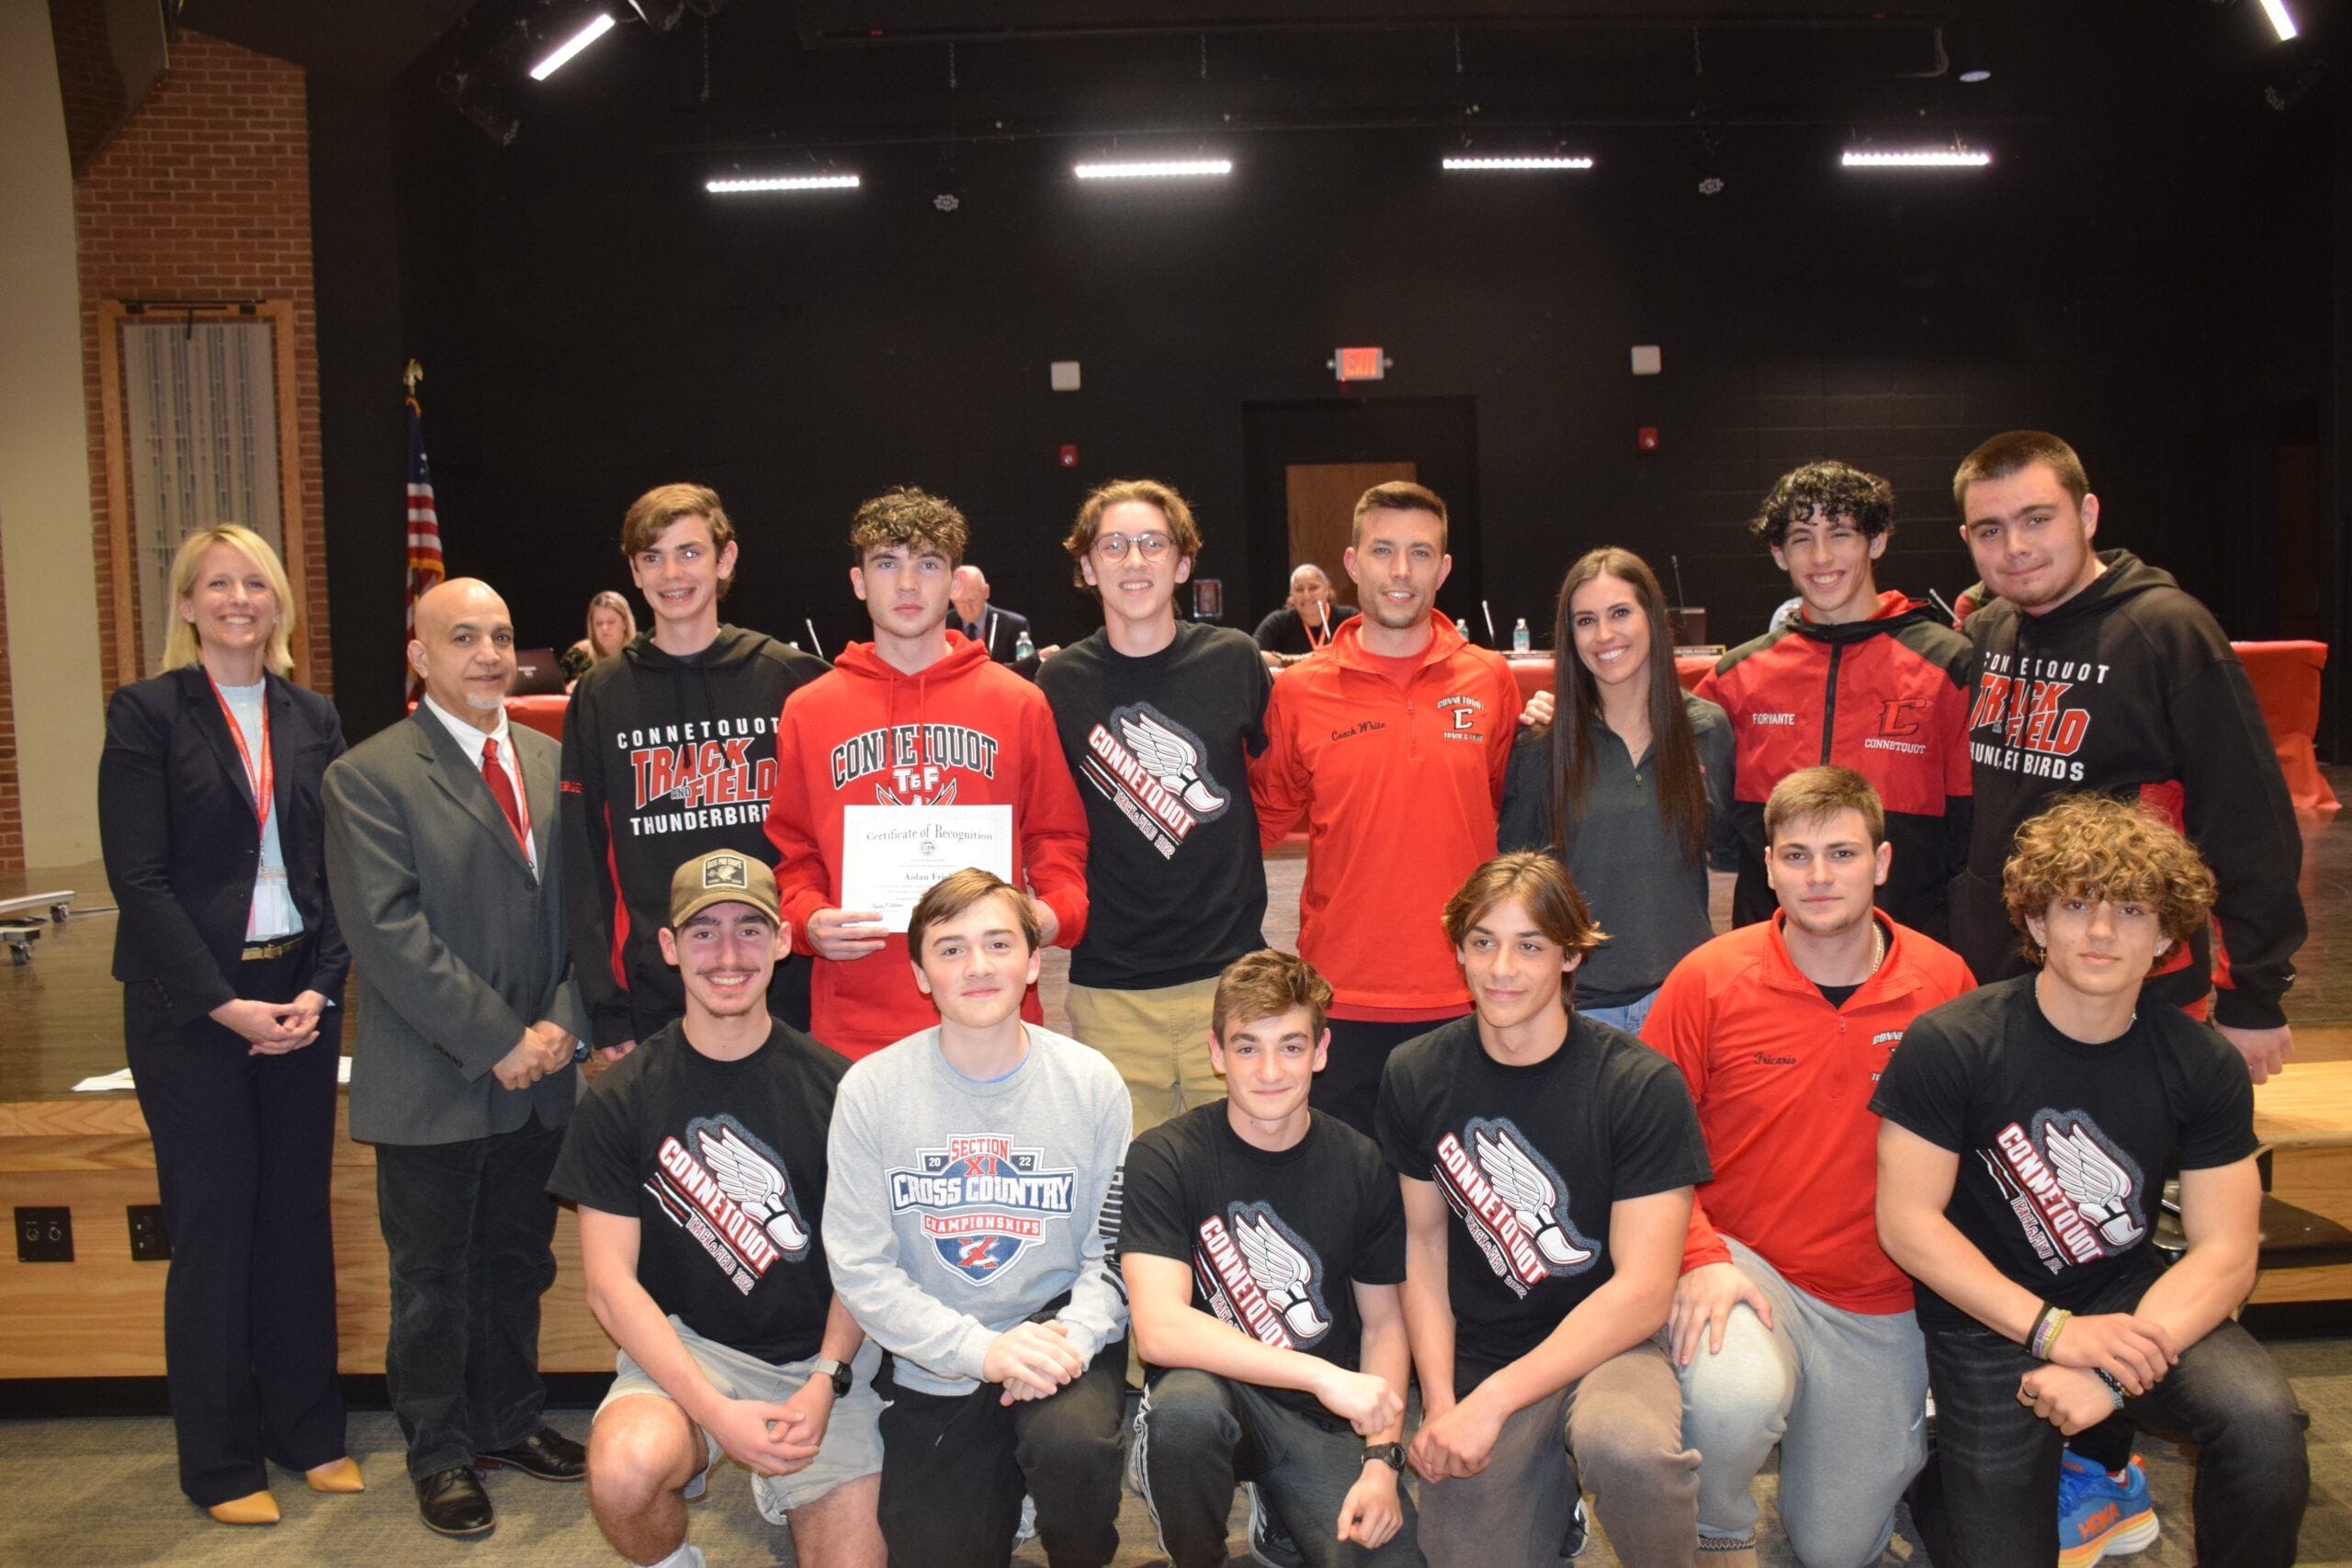 Connetquot Board Of Education Recognizes Top Winter Athletes